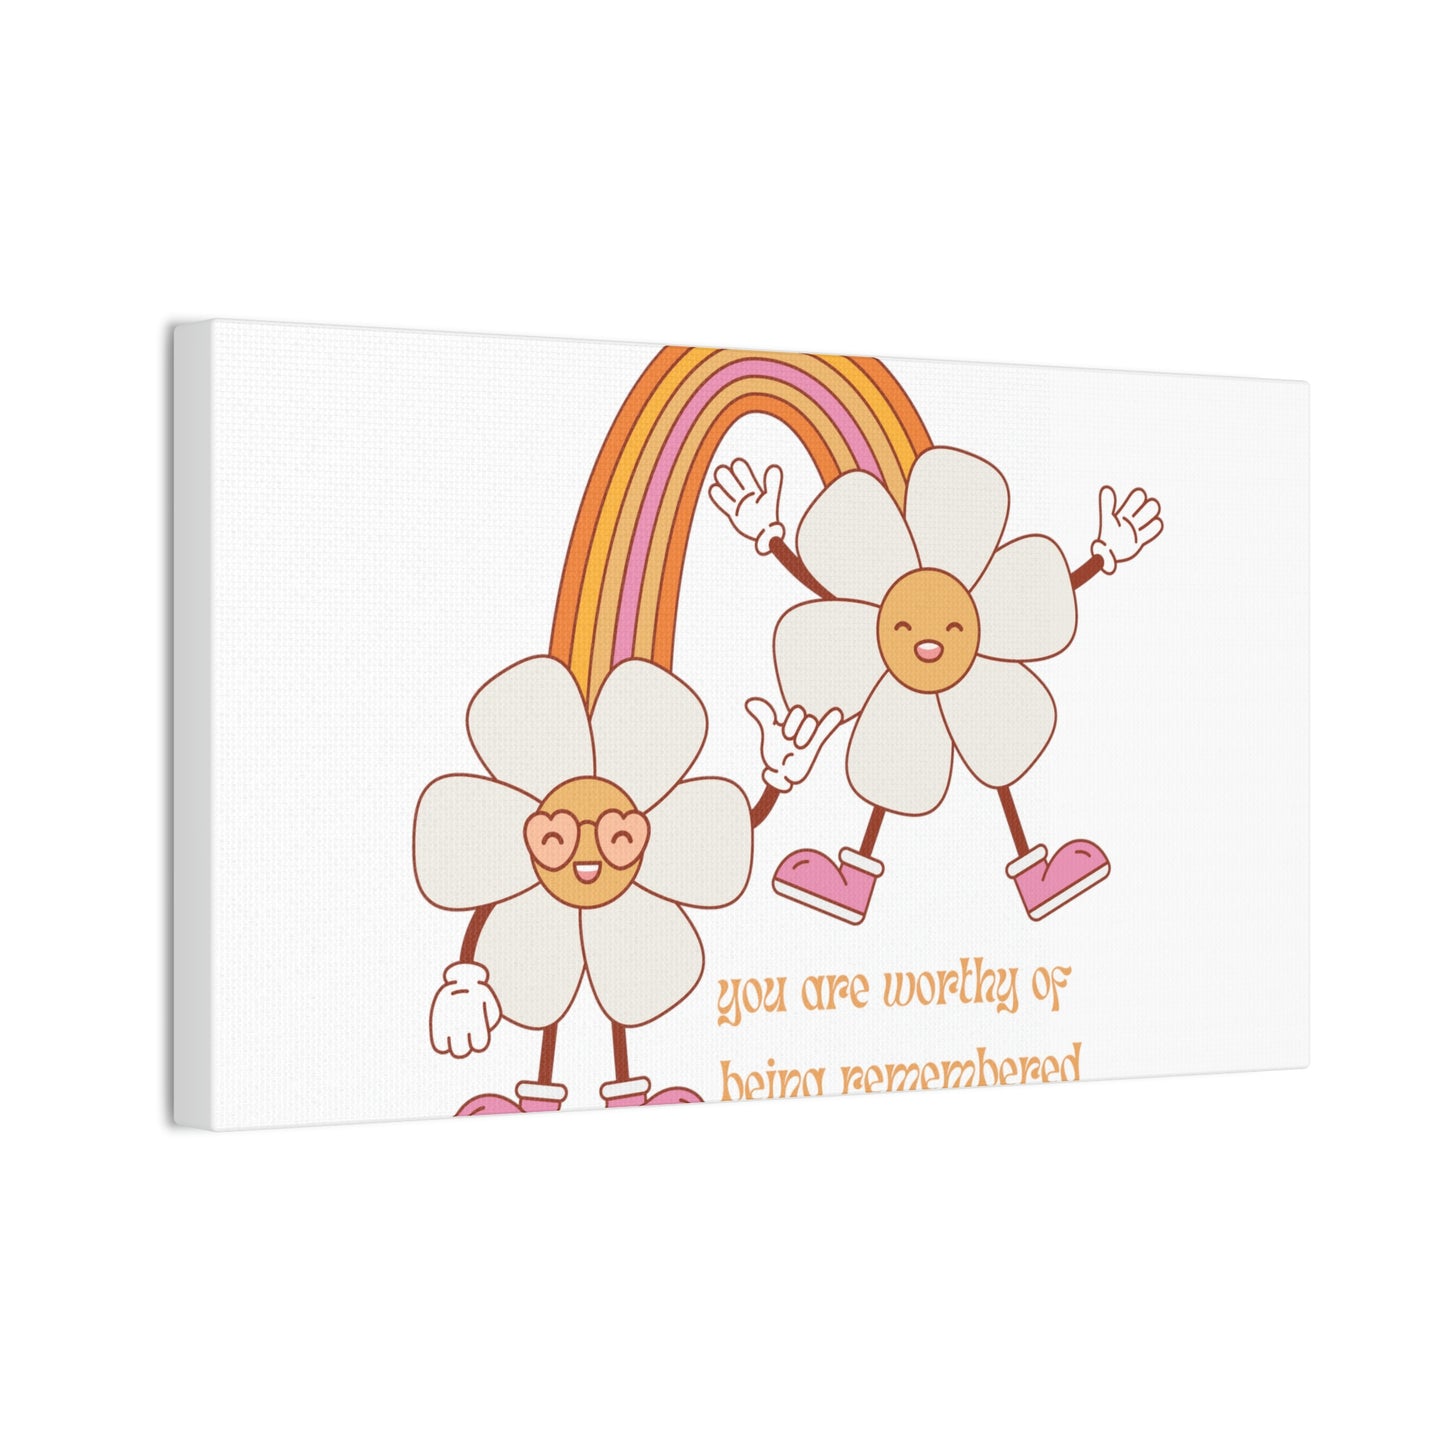 You are worthy of being remembered groovy flower - Canvas Stretched, 0.75"